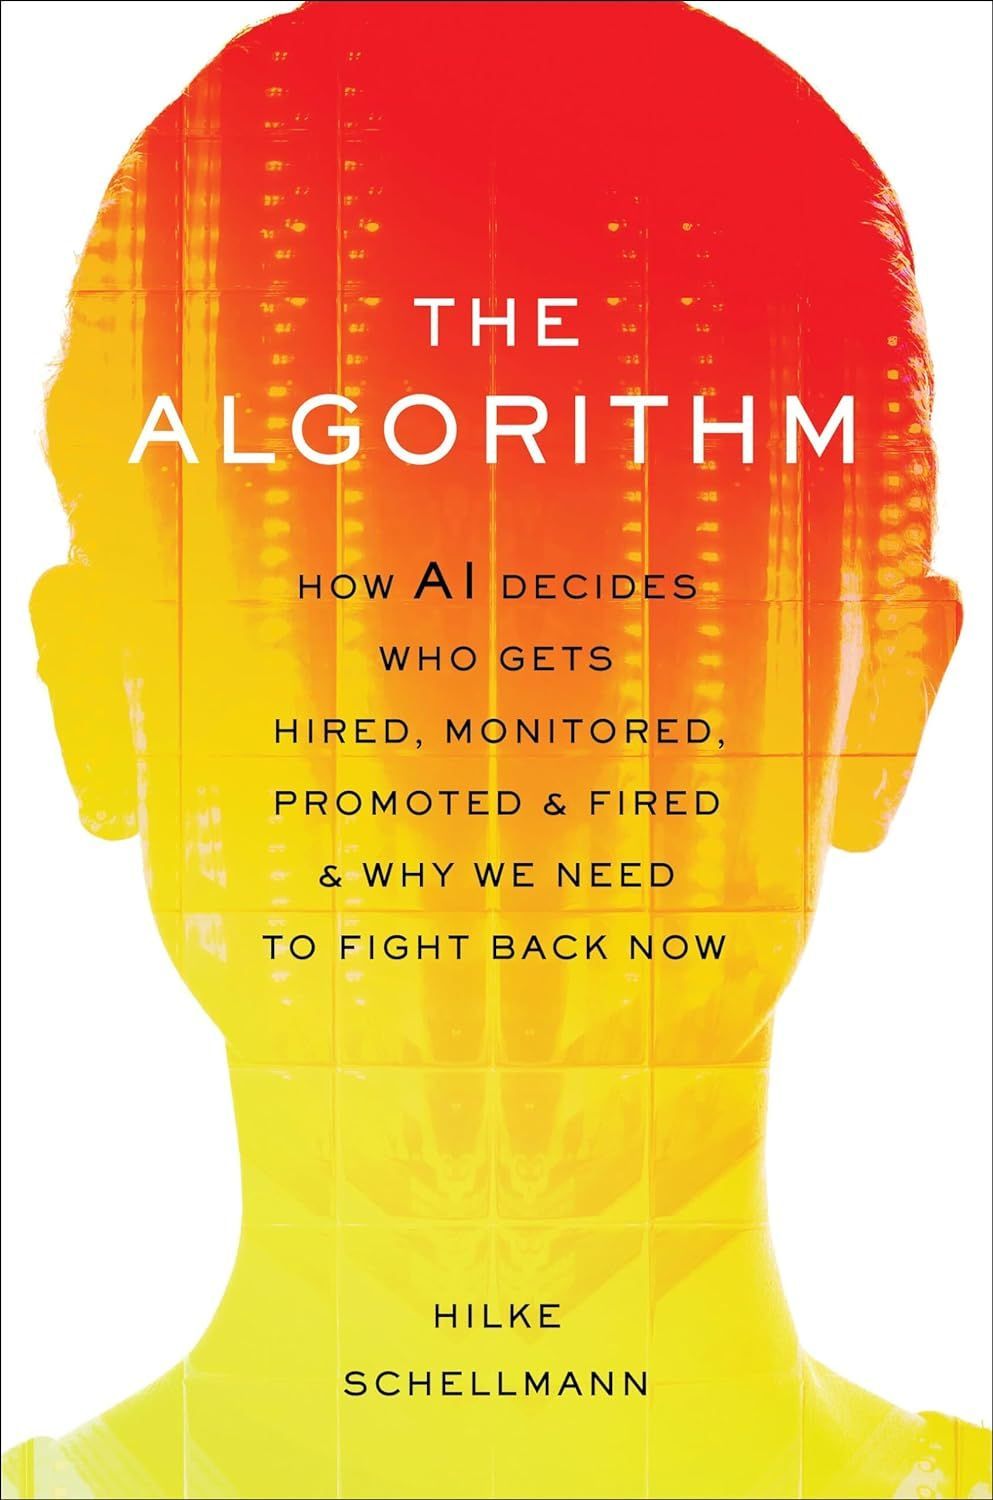 Keeping Humans in the Loop: On Hilke Schellmann’s “The Algorithm”